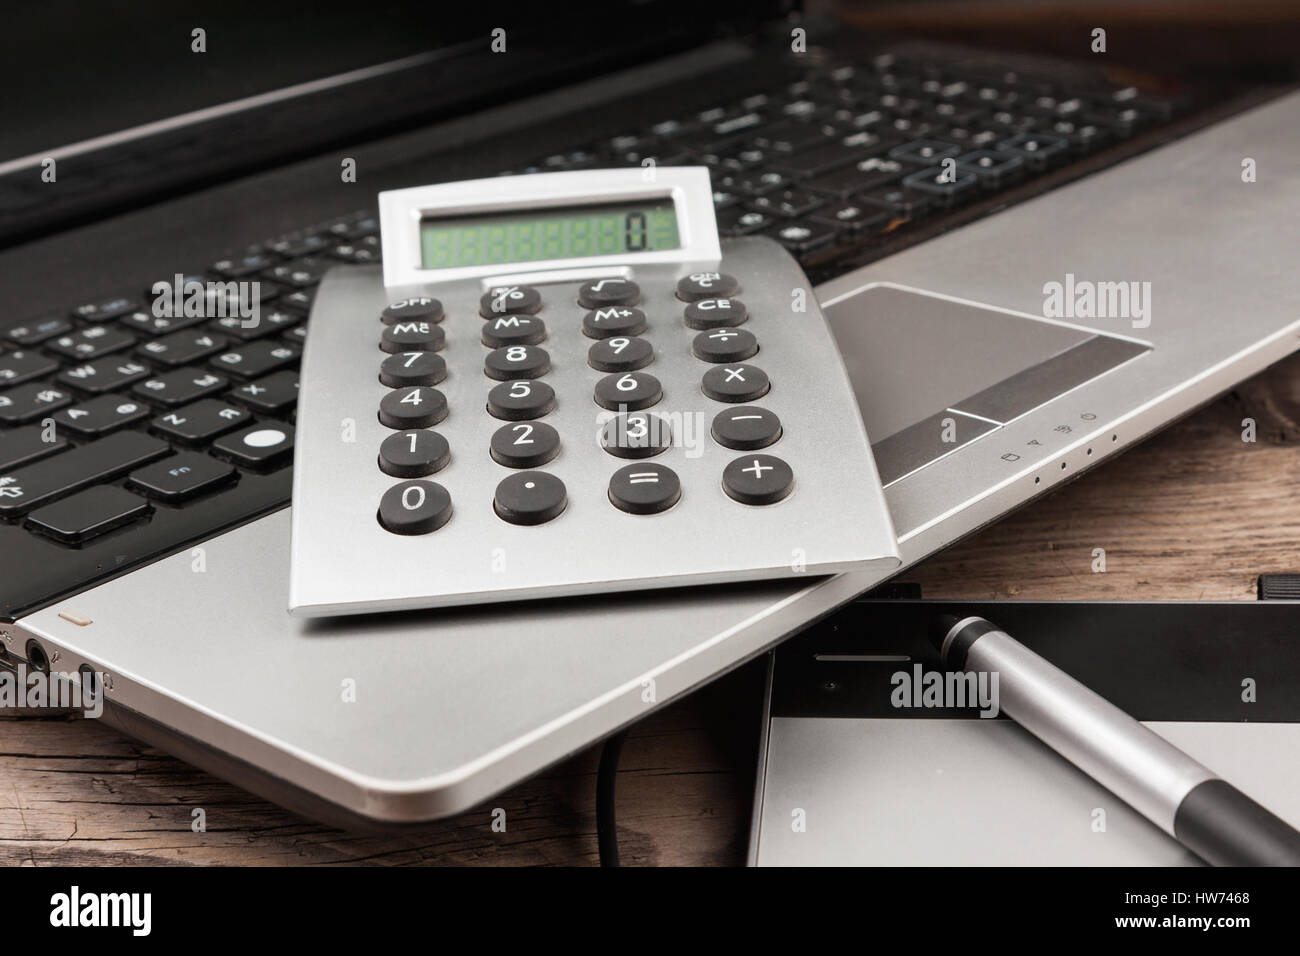 Laptop with a calculator and a graphic tablet on a wooden table. View of the desktop. Stock Photo